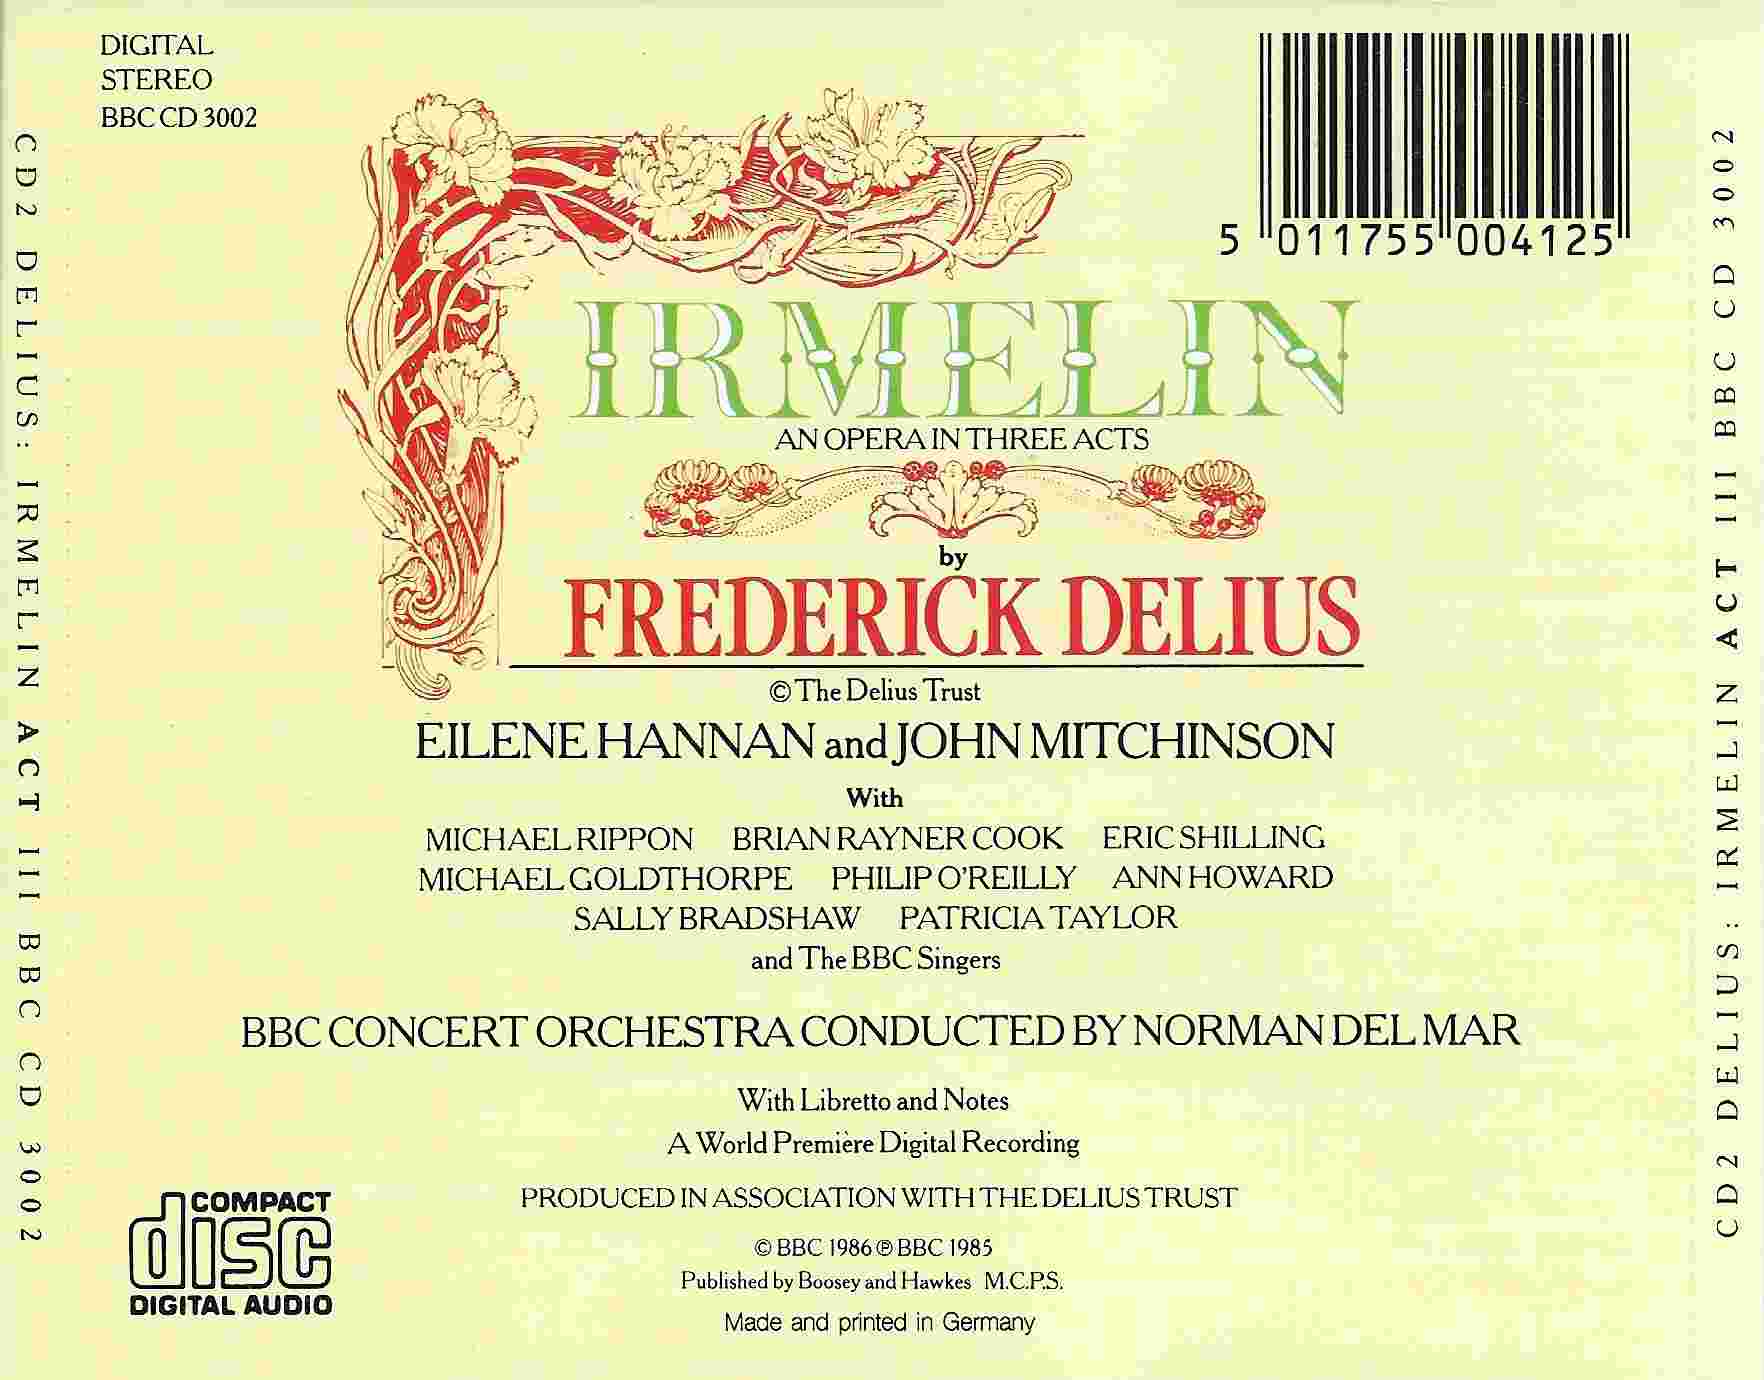 Picture of BBCCD3002 Irmelin by artist Frederick Delius from the BBC records and Tapes library